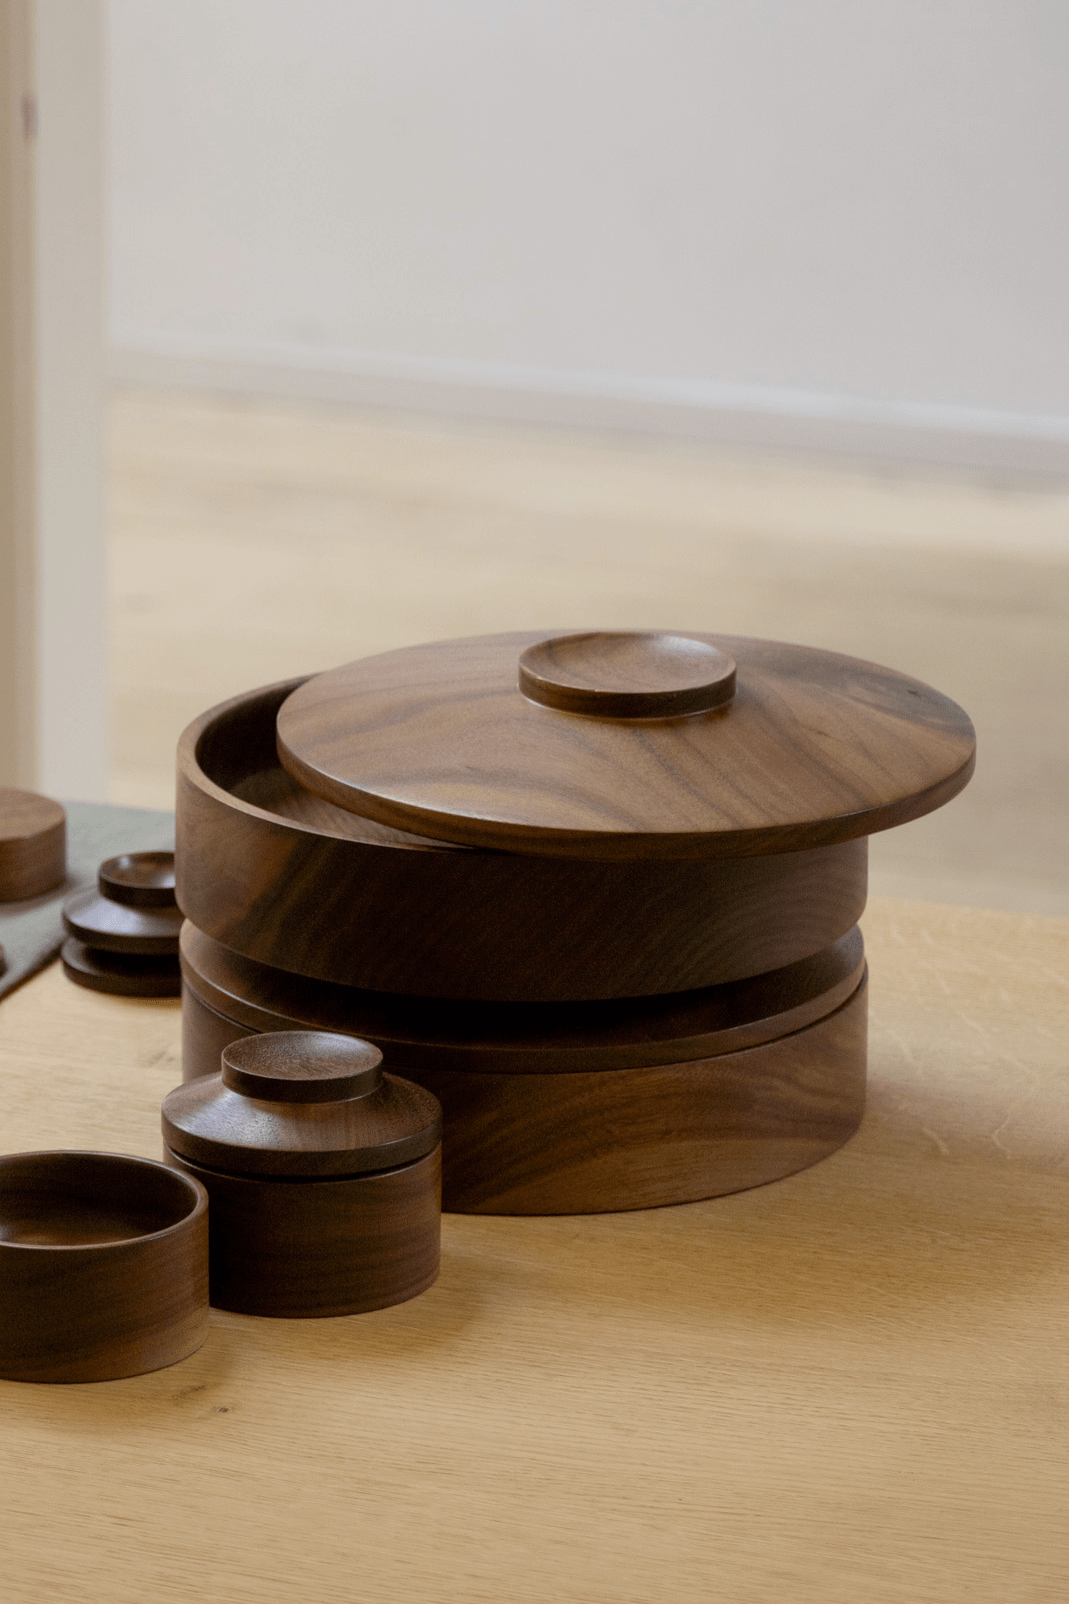 Repeat Stackable Cookie Jars with the lid slightly removed. The dark walnut wood creates a sense of warmth and the modular nature allows for creative arrangements.